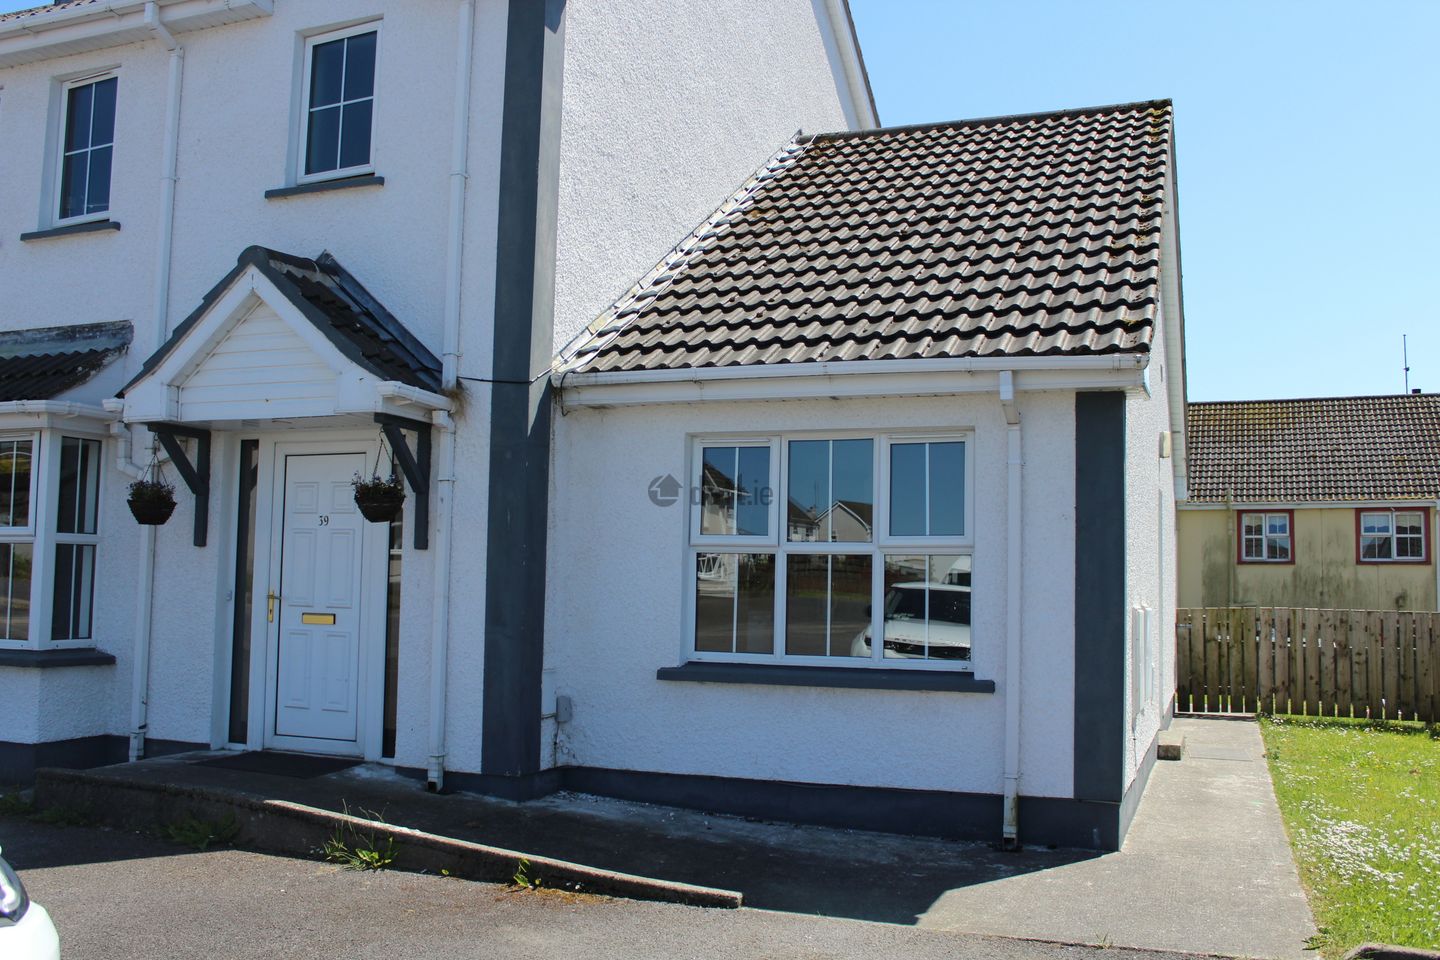 39A Glendale Manor, Letterkenny, Co. Donegal